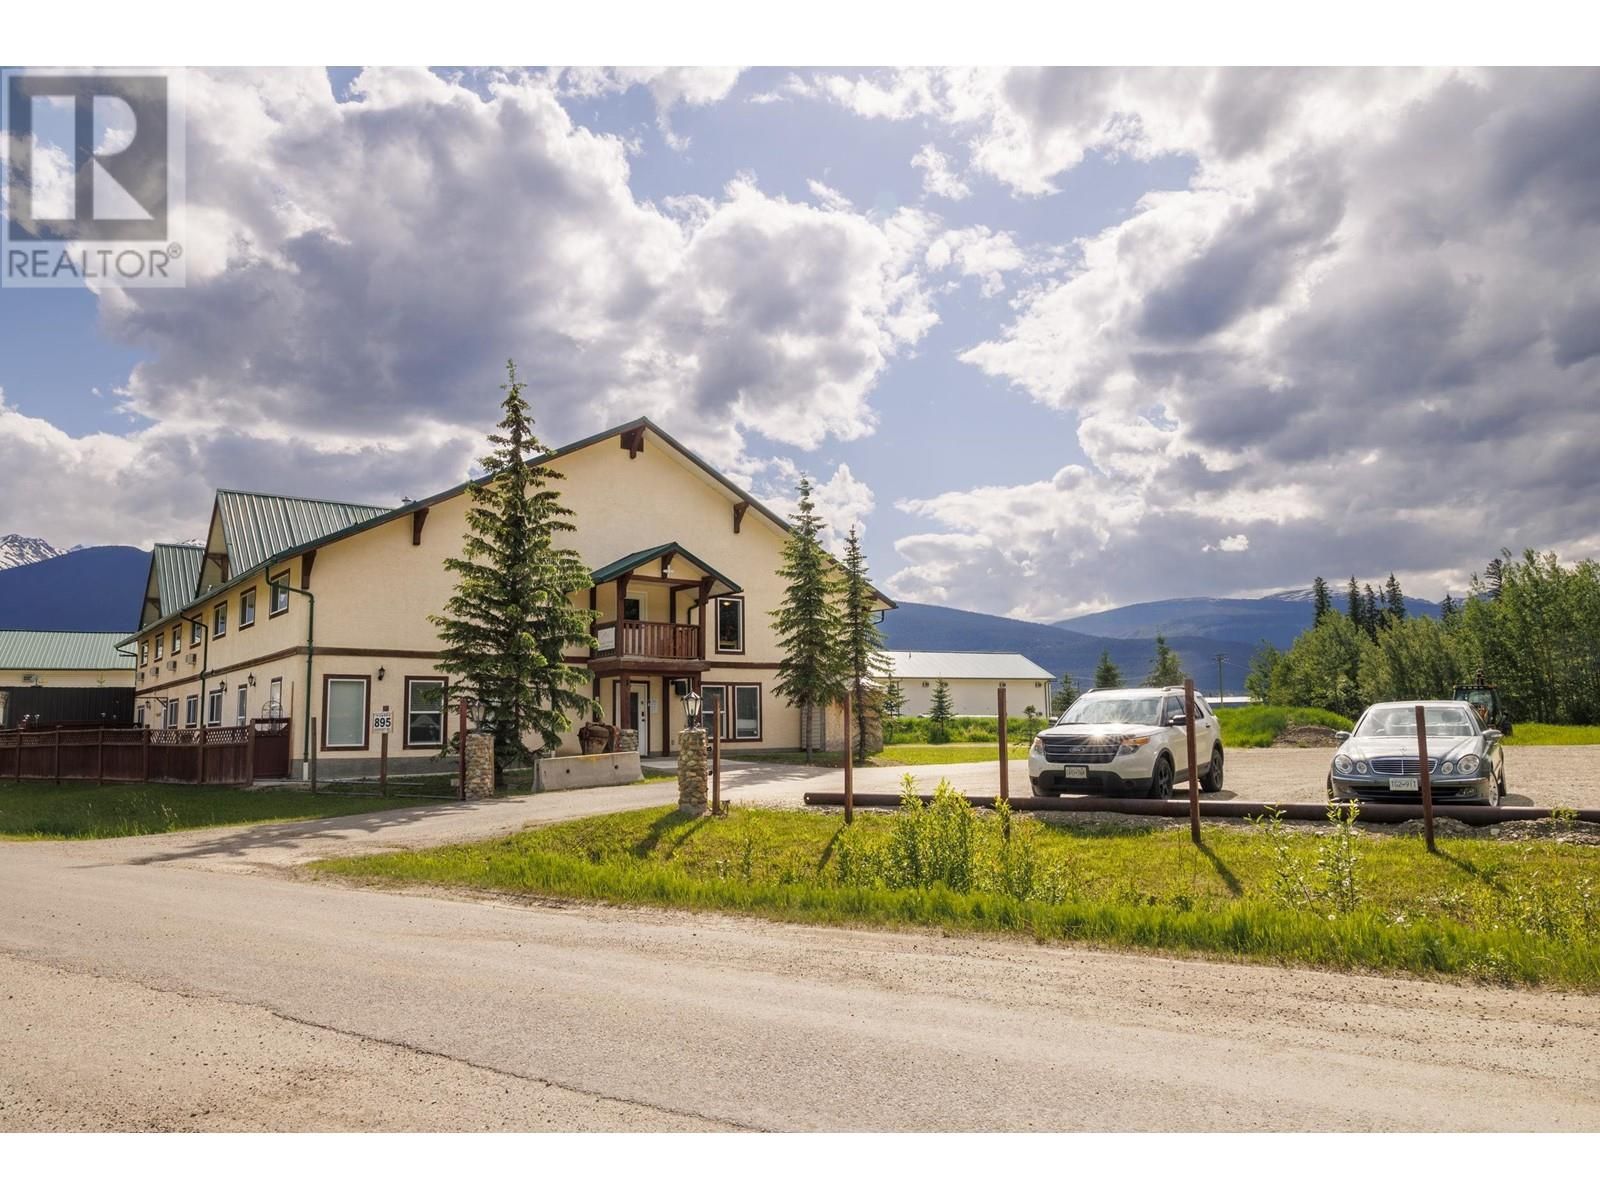 Main Photo: 895 AIRPORT ROAD in Robson Valley: Business for sale : MLS®# C8051931